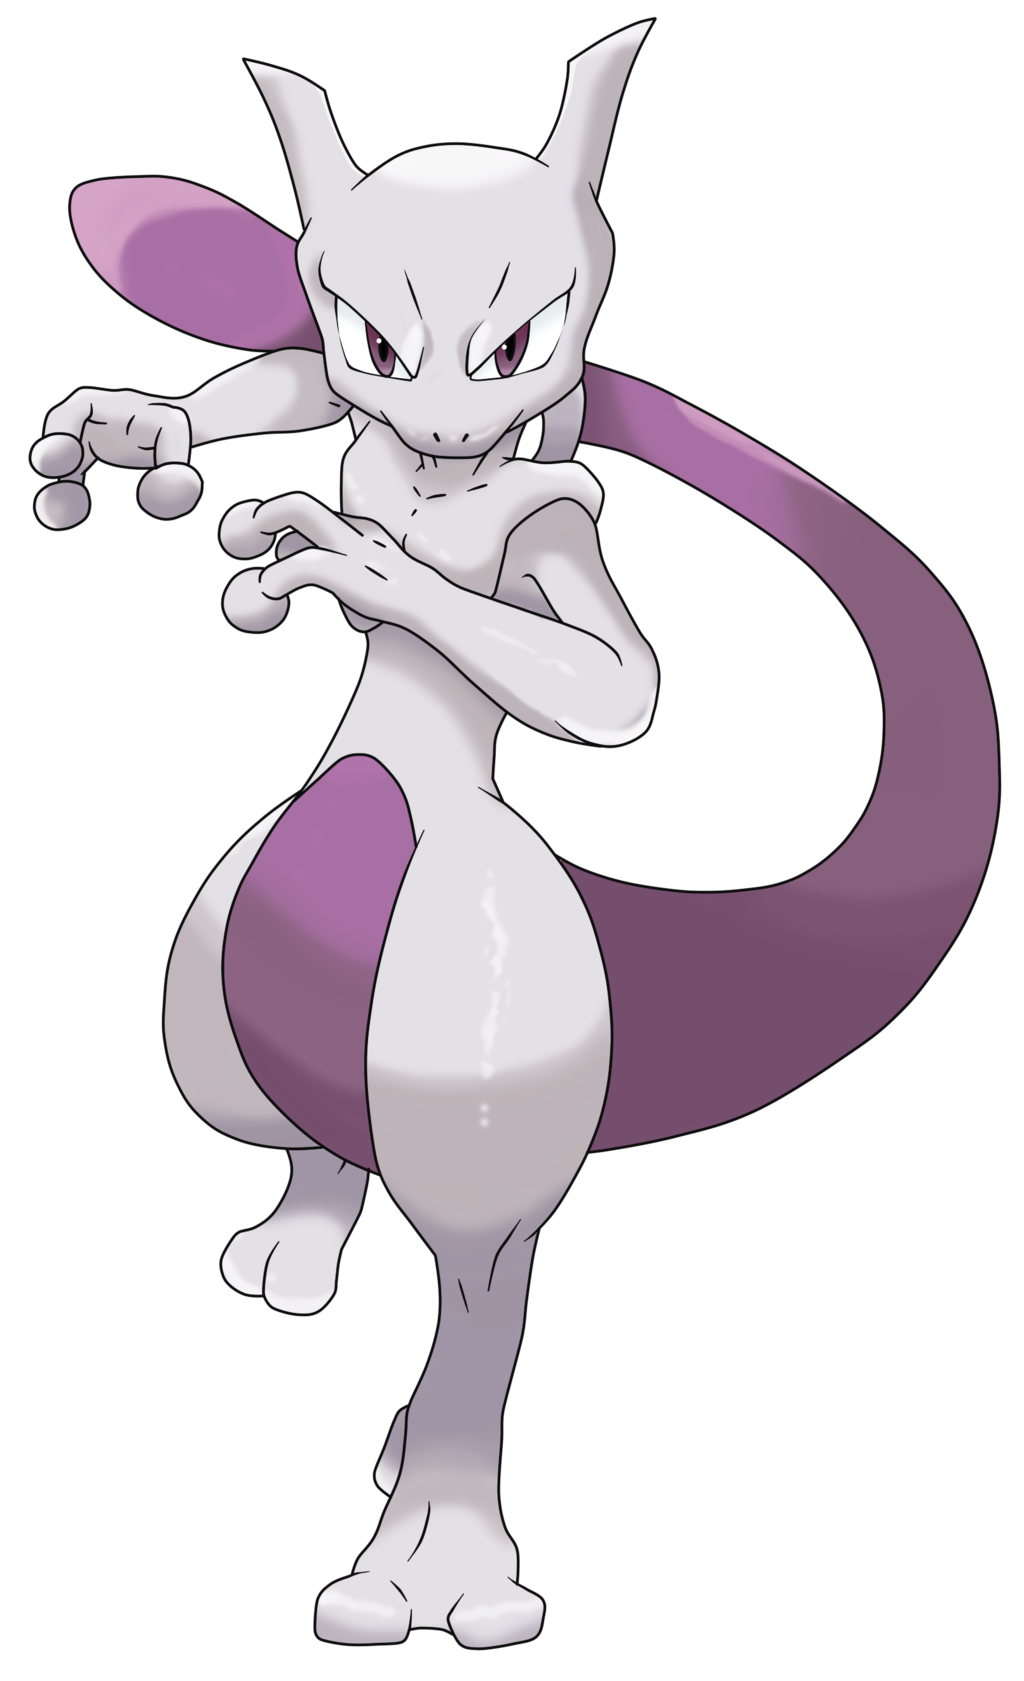 Mewtwo PNG - 46197